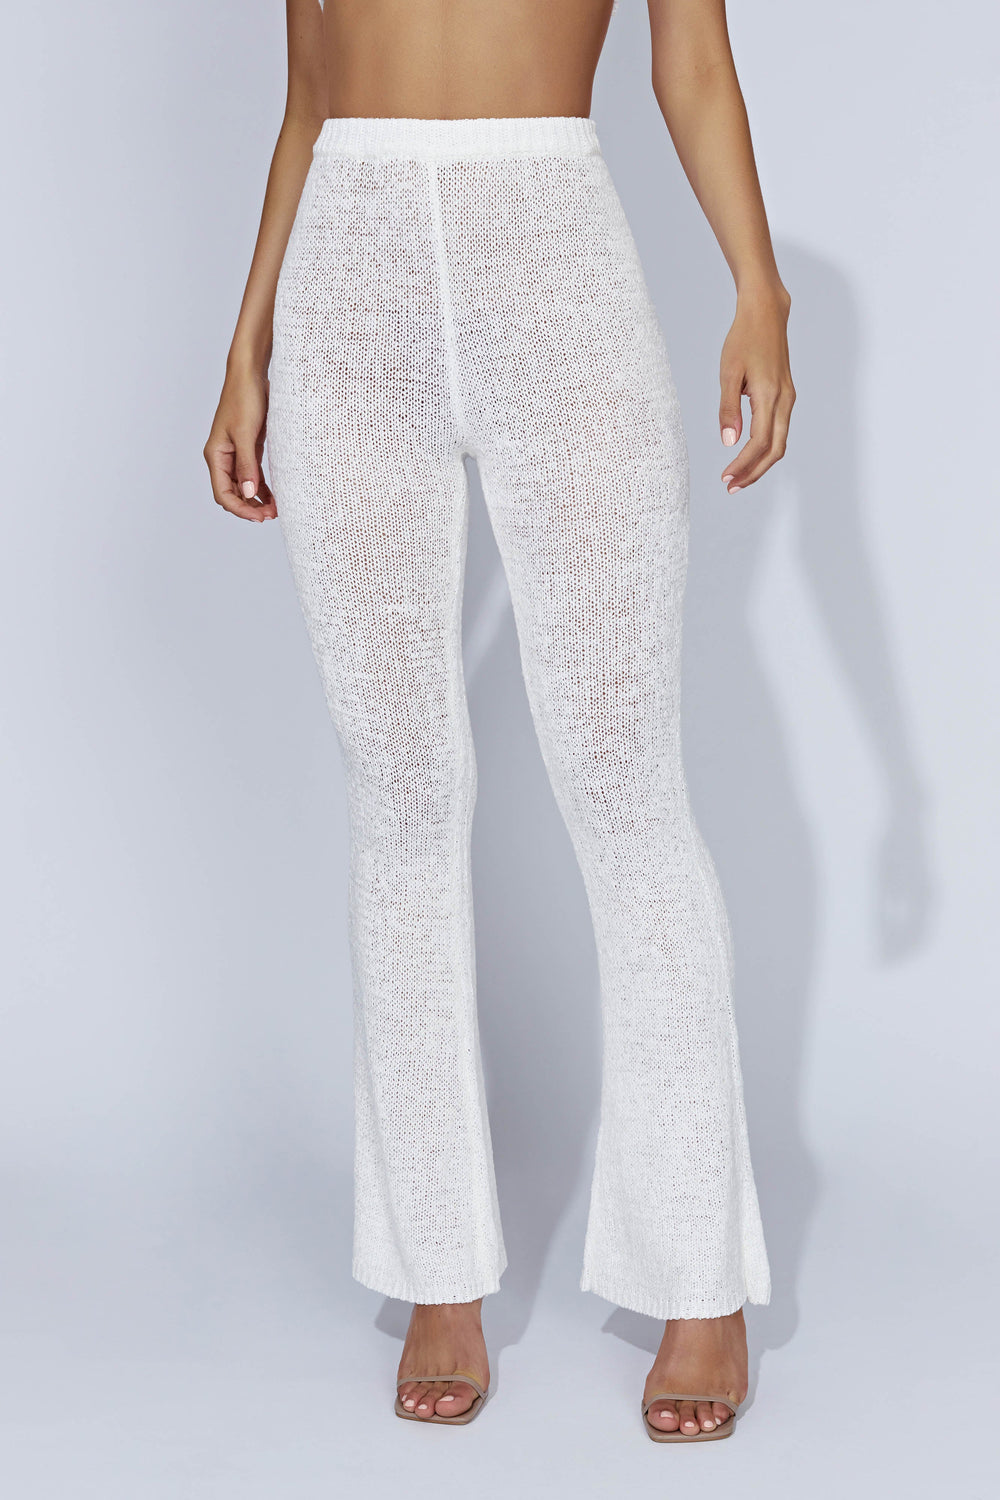 Mary Knit Flared Pants - White